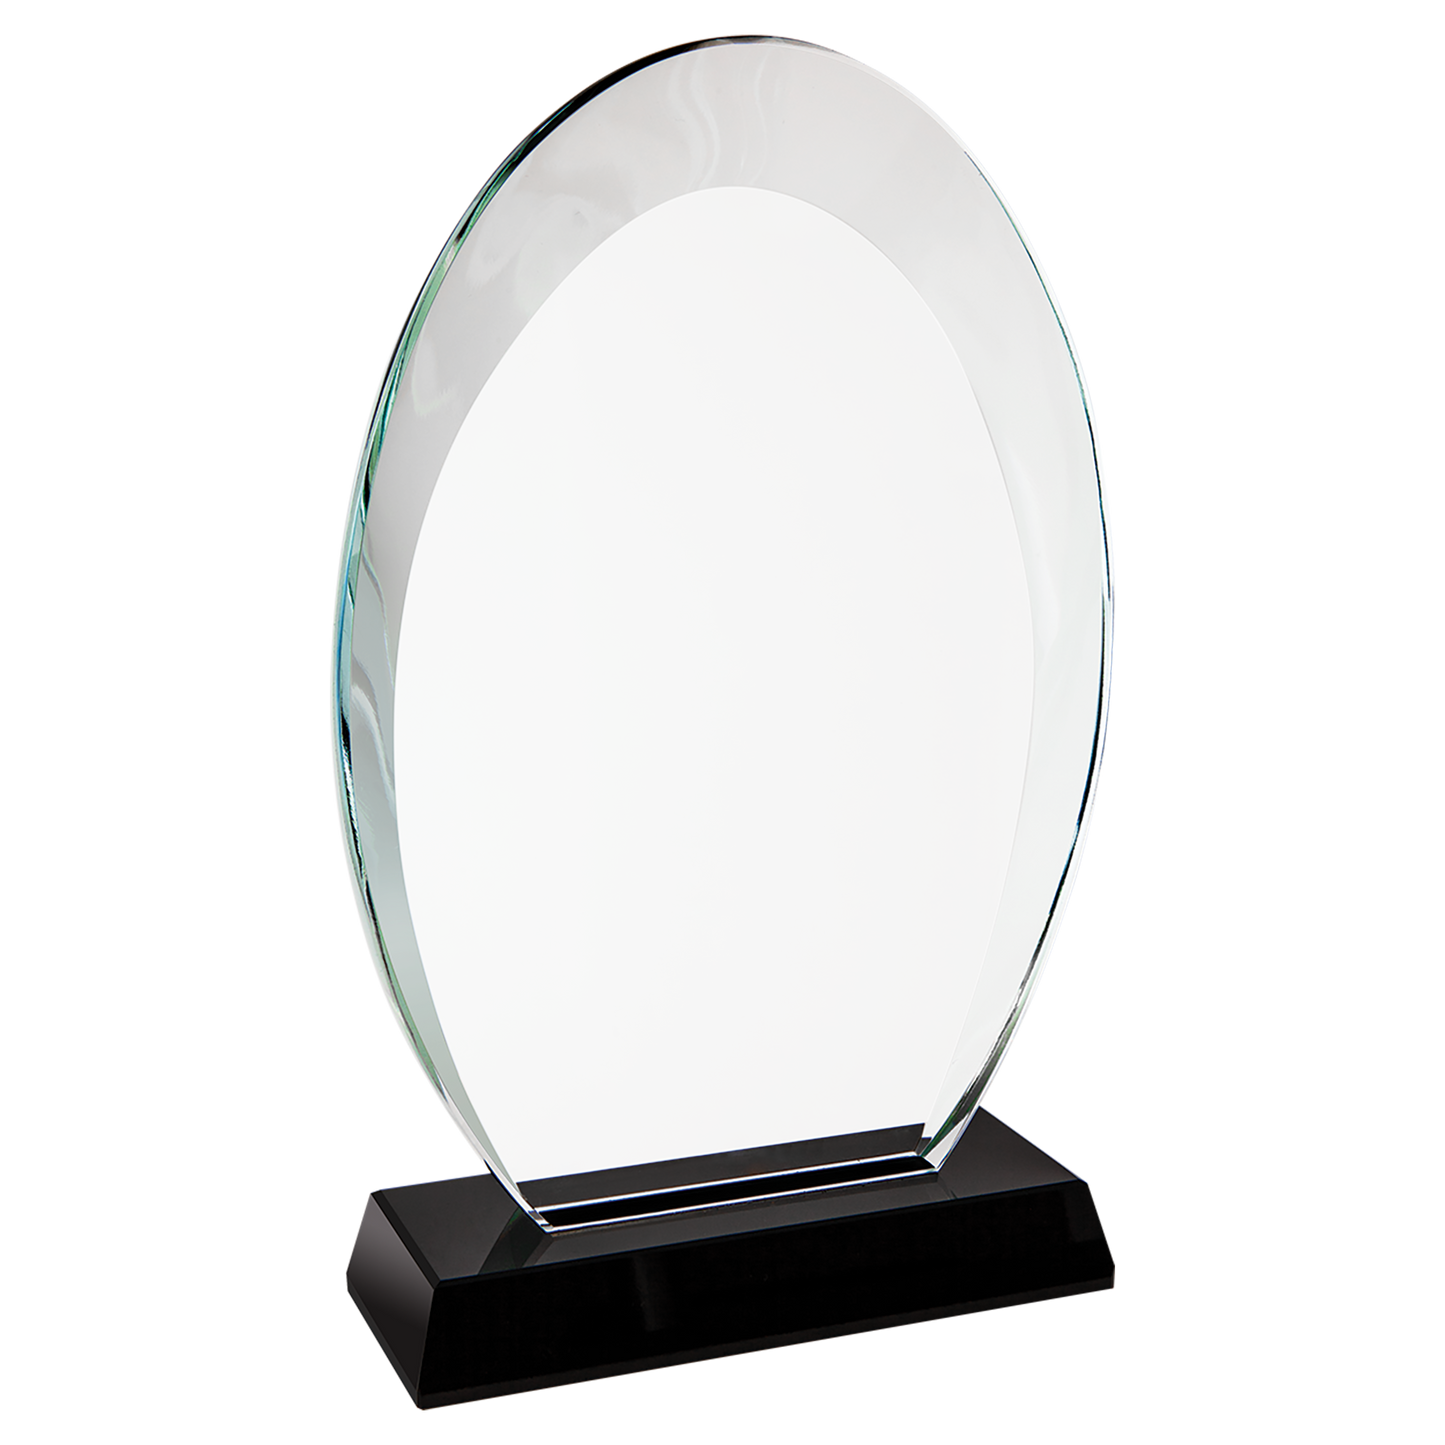 8" Oval Halo Glass with Black Base Corporate Awards - Glass Awards